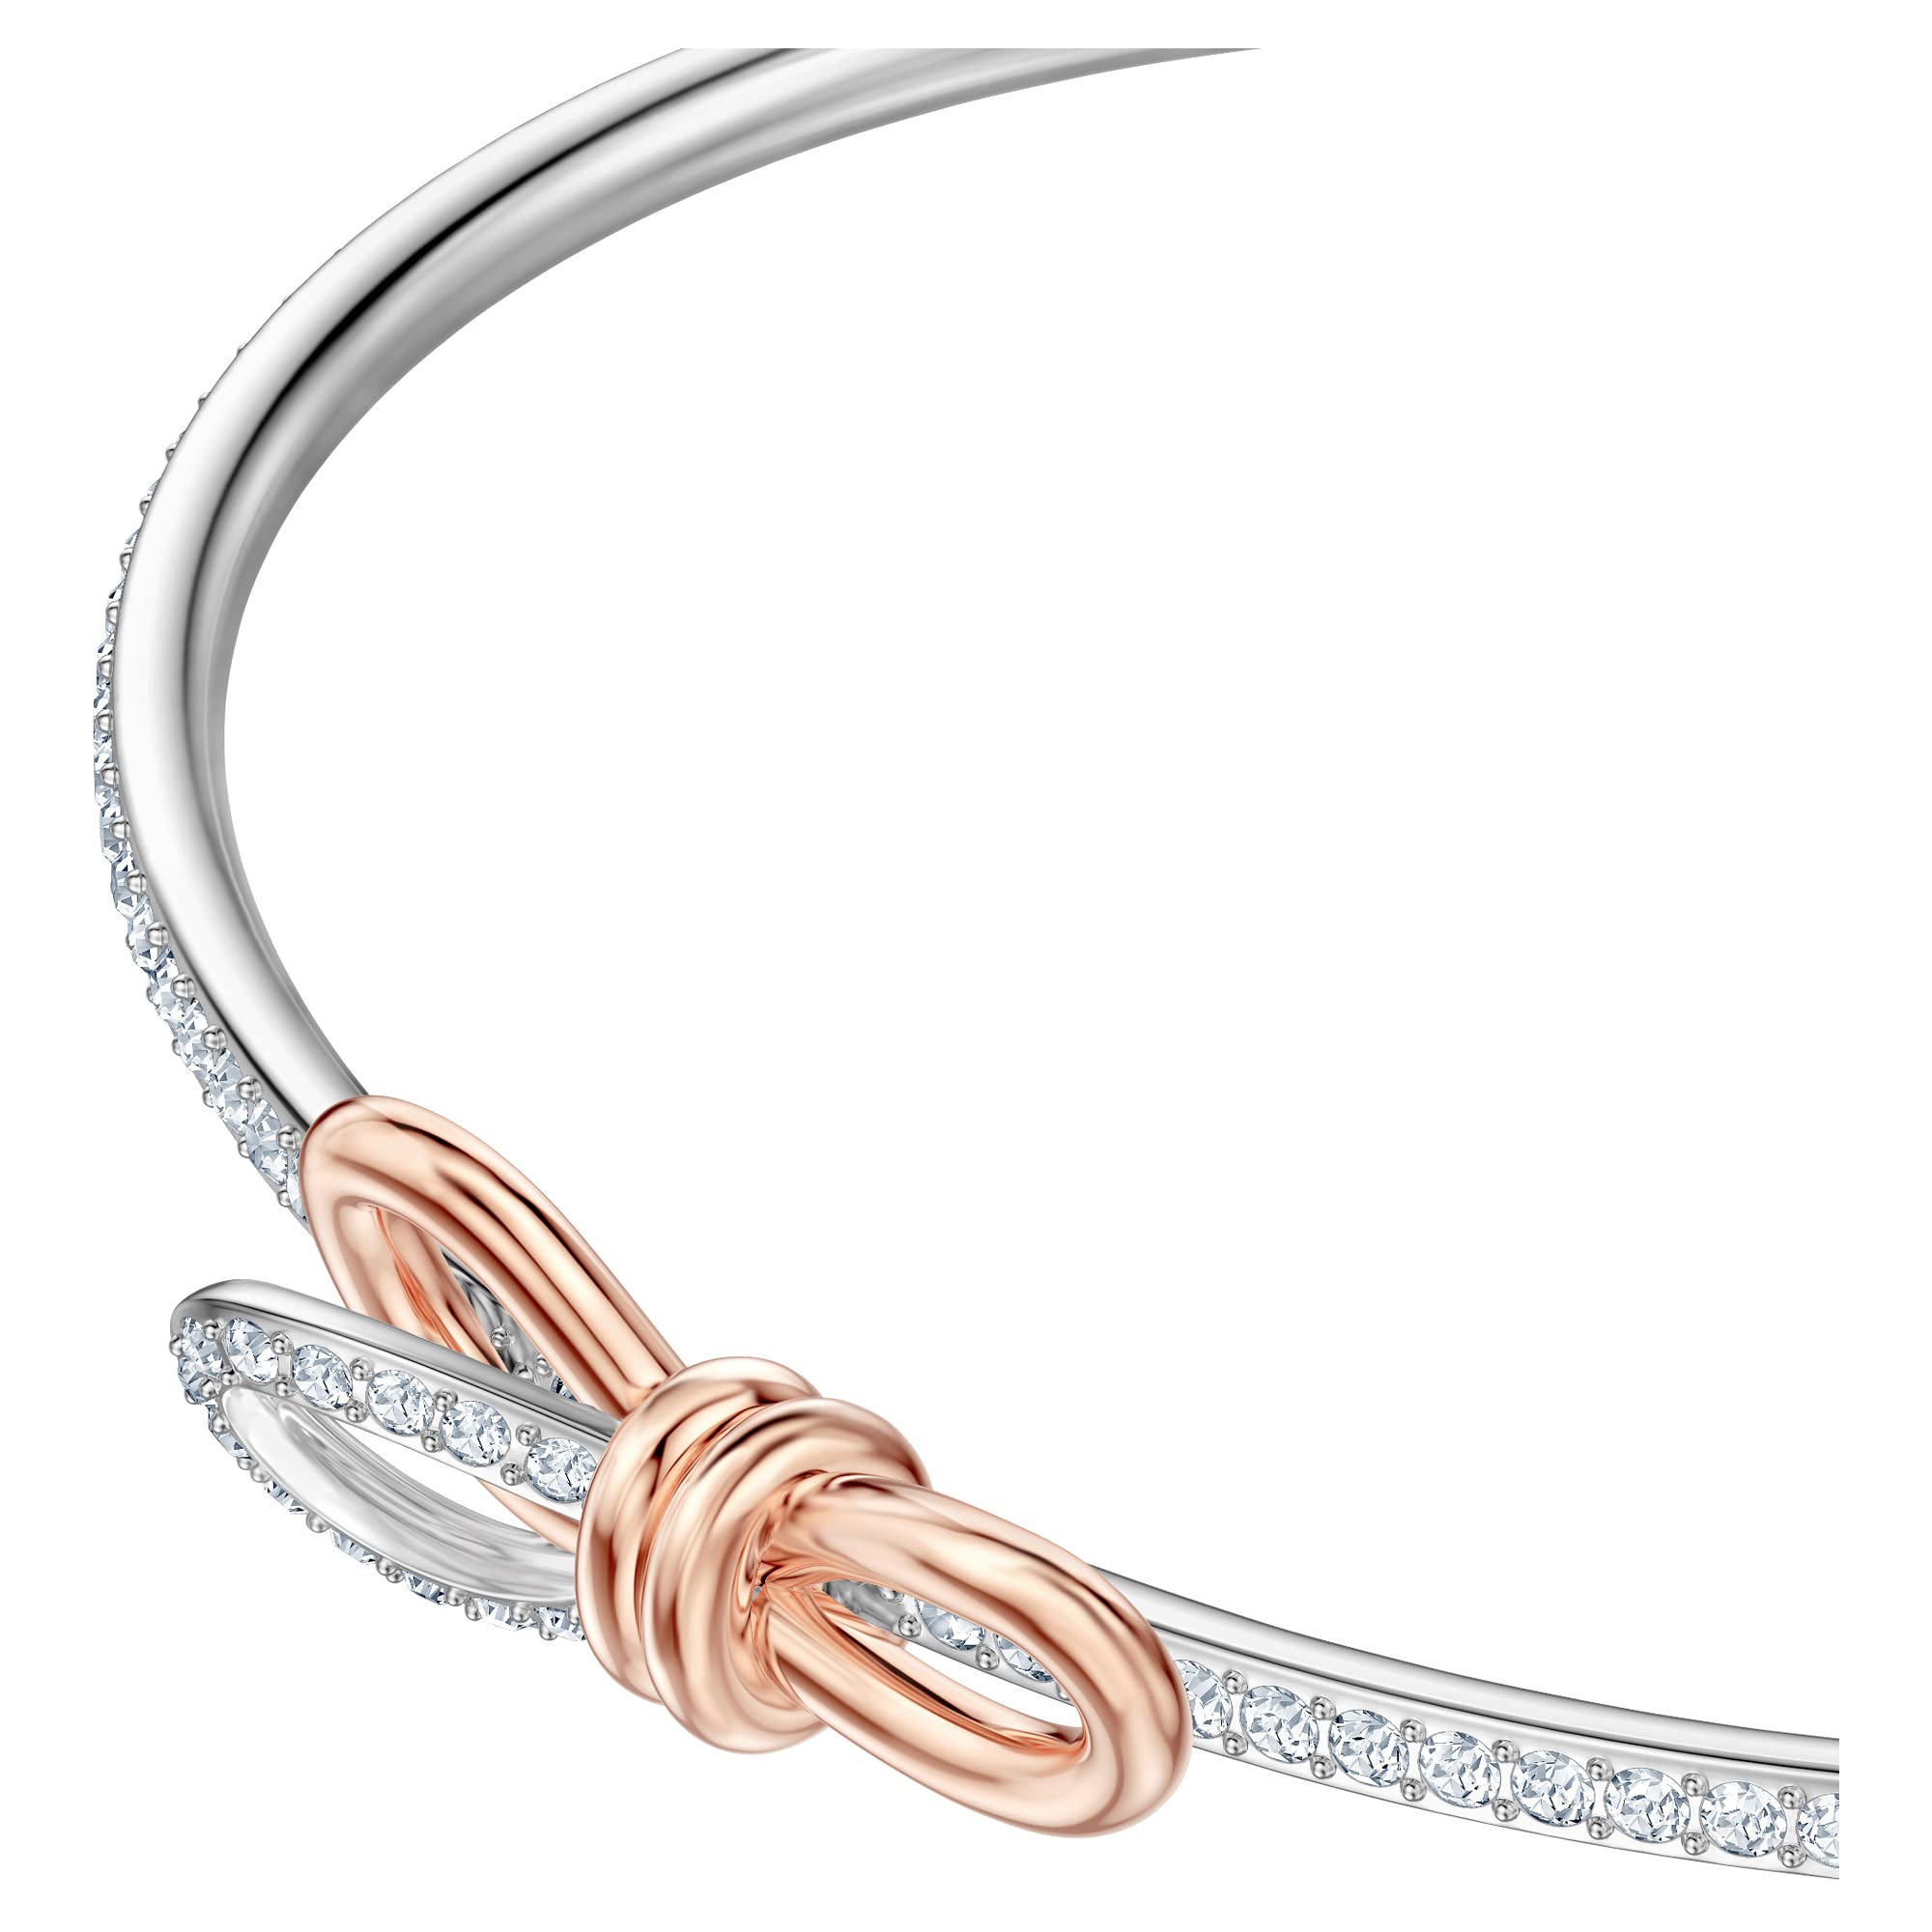 Swarovski Lifelong Bow Necklace and Bracelet Jewelry Collection, Clear Crystals, Rhodium Finish